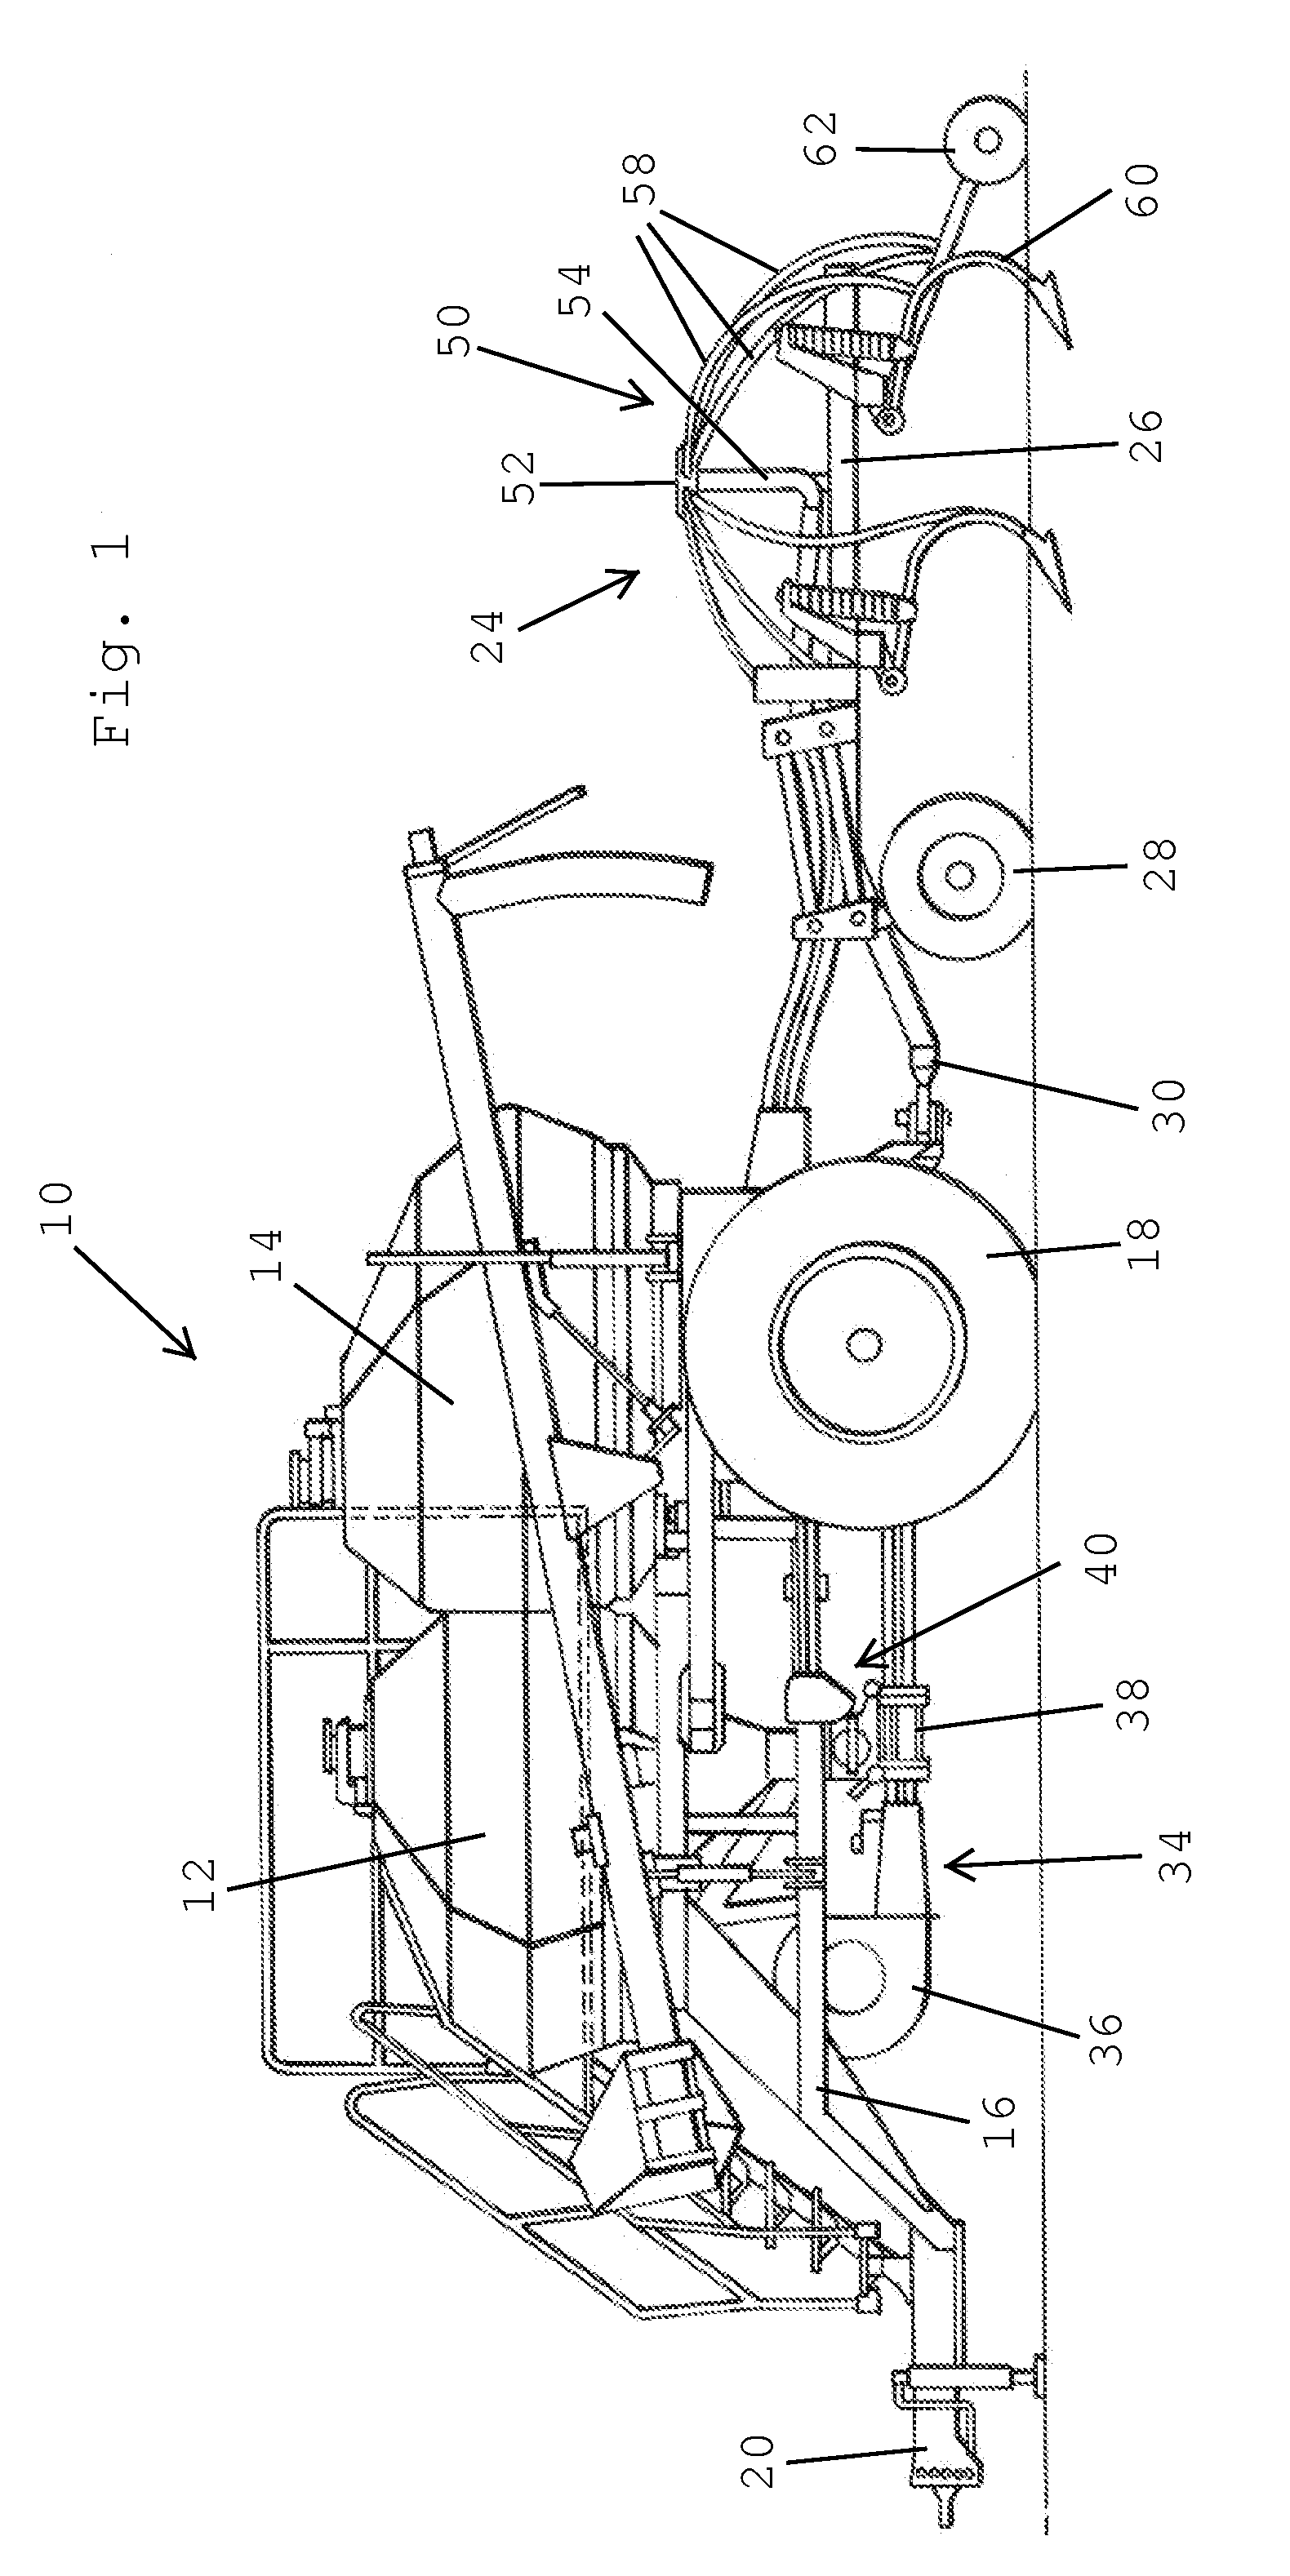 Particulate flow sensing for an agricultural implement